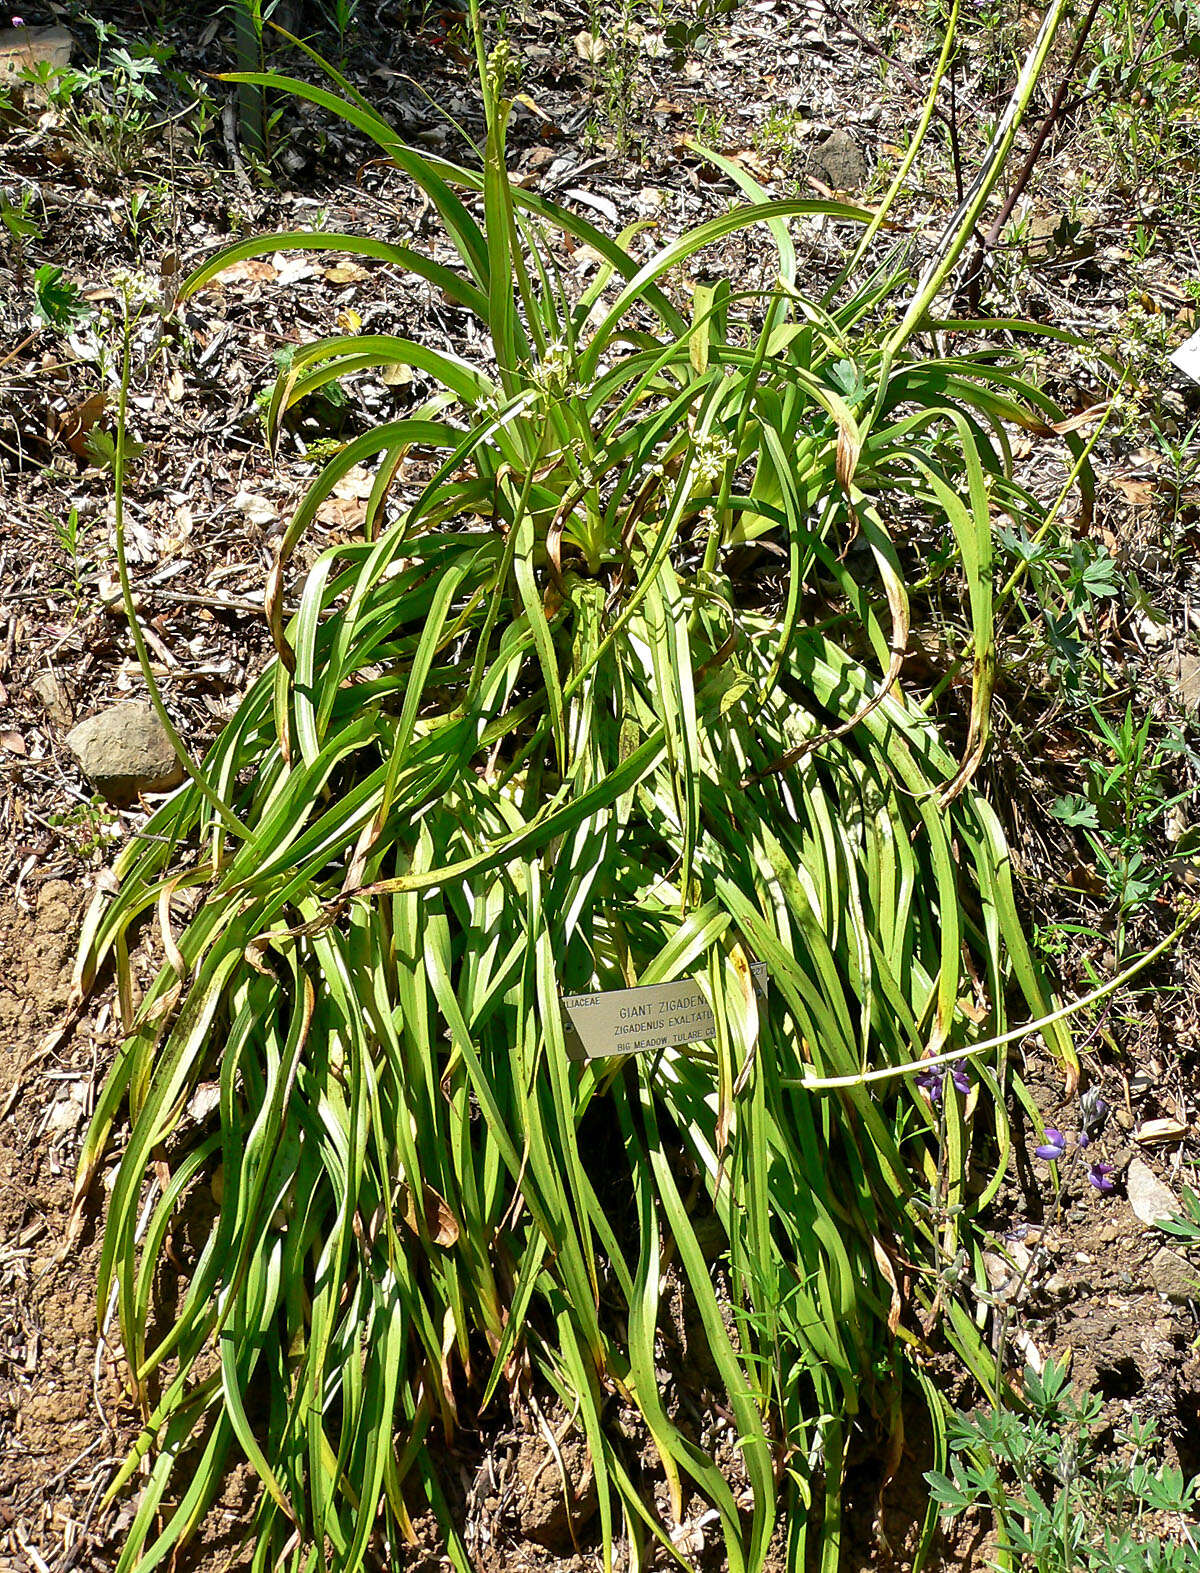 Image of giant deathcamas